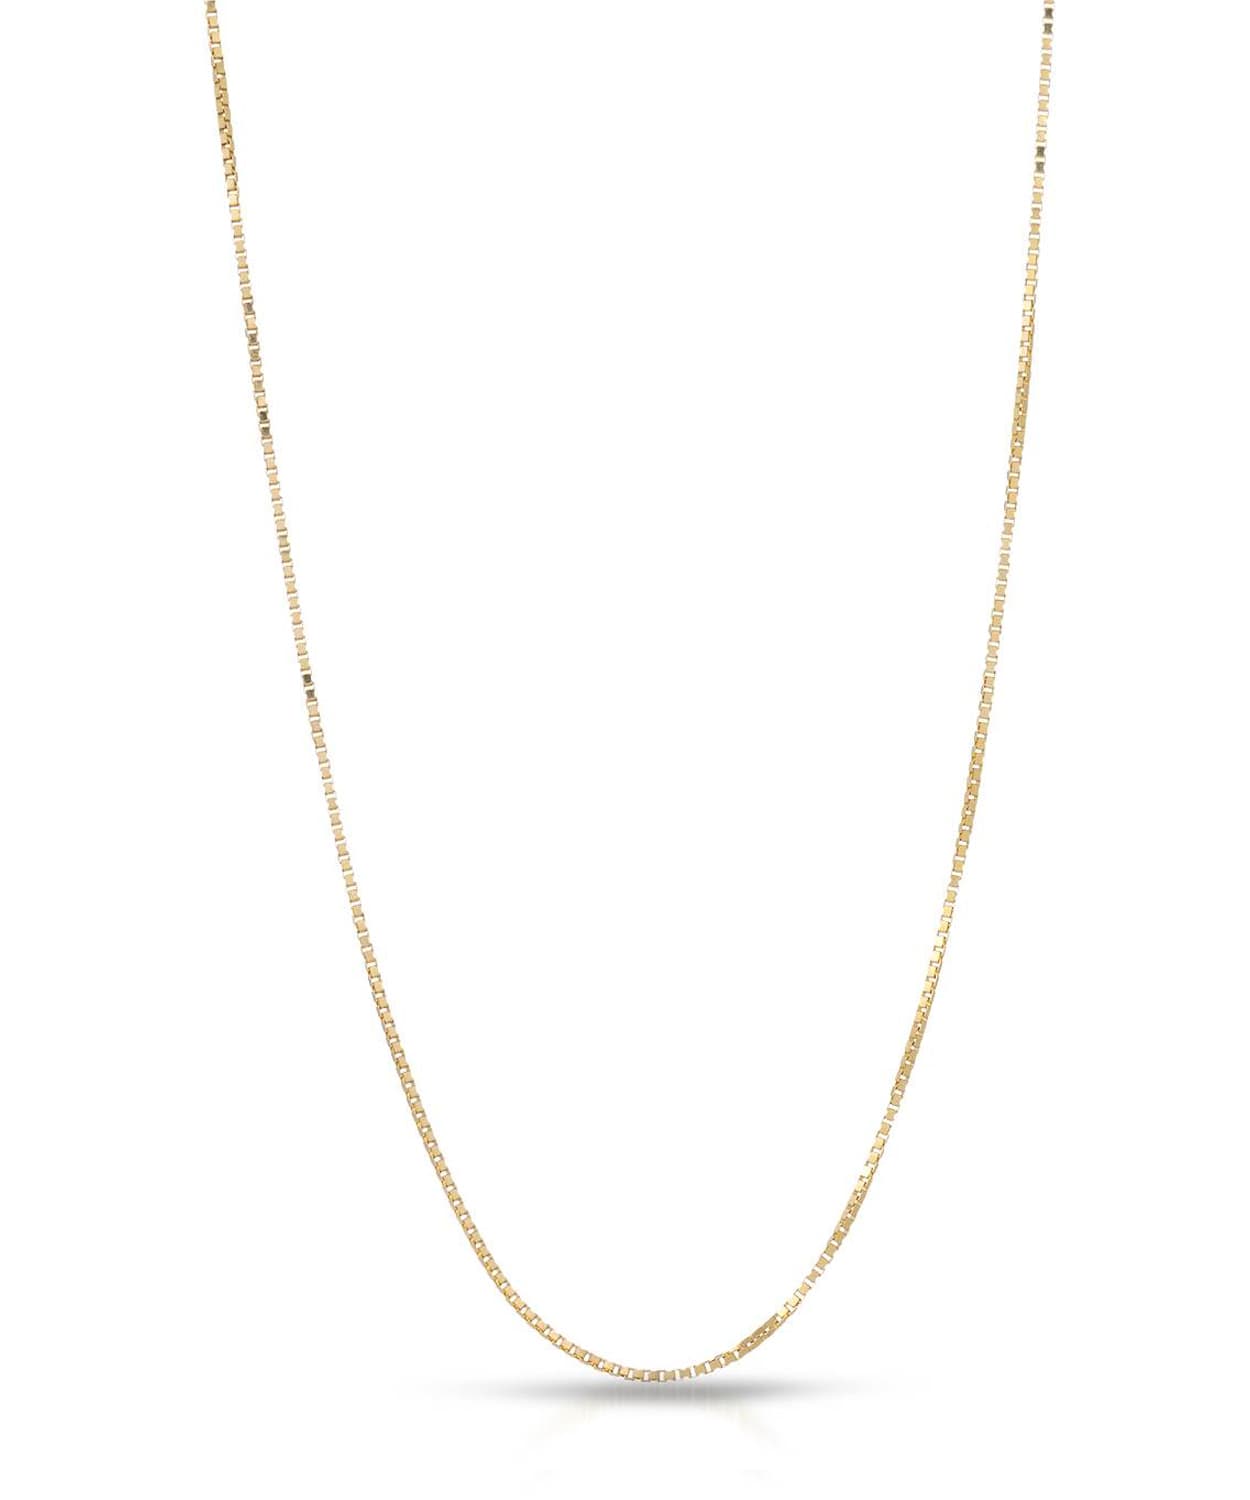 0.5mm 14k Yellow Gold Box Adjustable Chain View 1